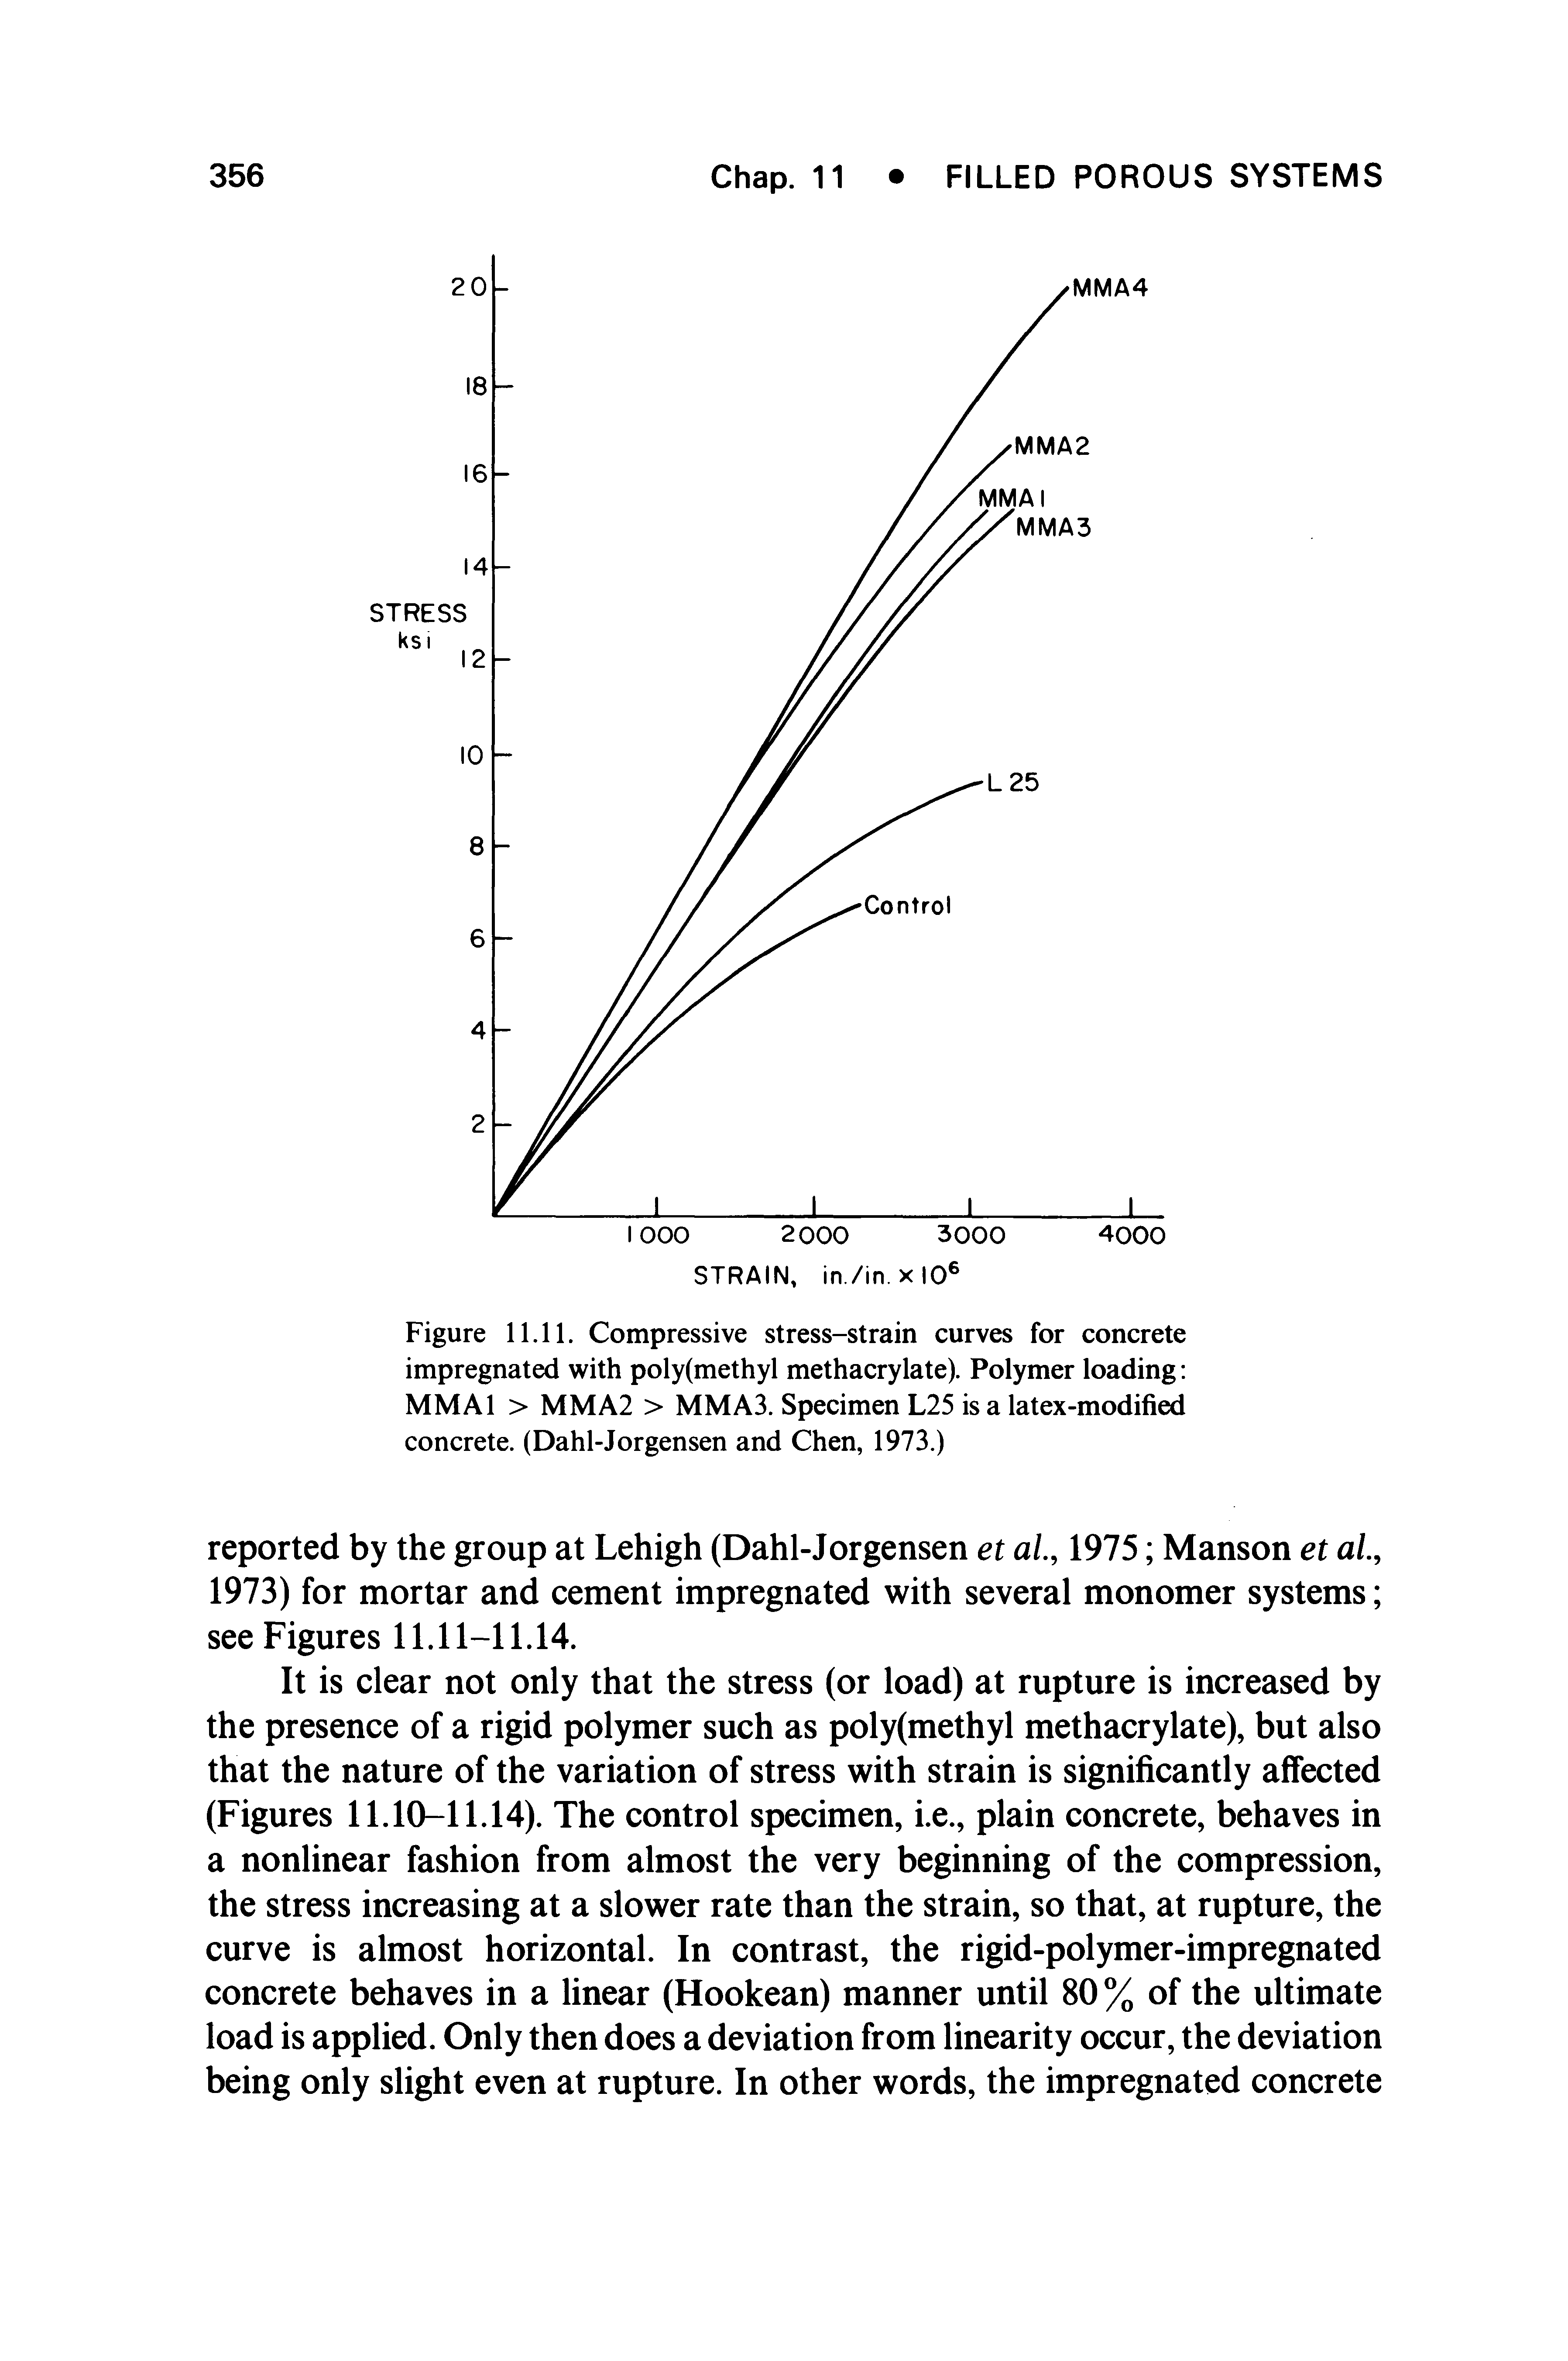 Figure 11.11. Compressive stress-strain curves for concrete impregnated with poly(methyl methacrylate). Polymer loading MMAl > MMA2 > MM A3. Specimen L25 is a latex-modified concrete. (Dahl-Jorgensen and Chen, 1973.)...